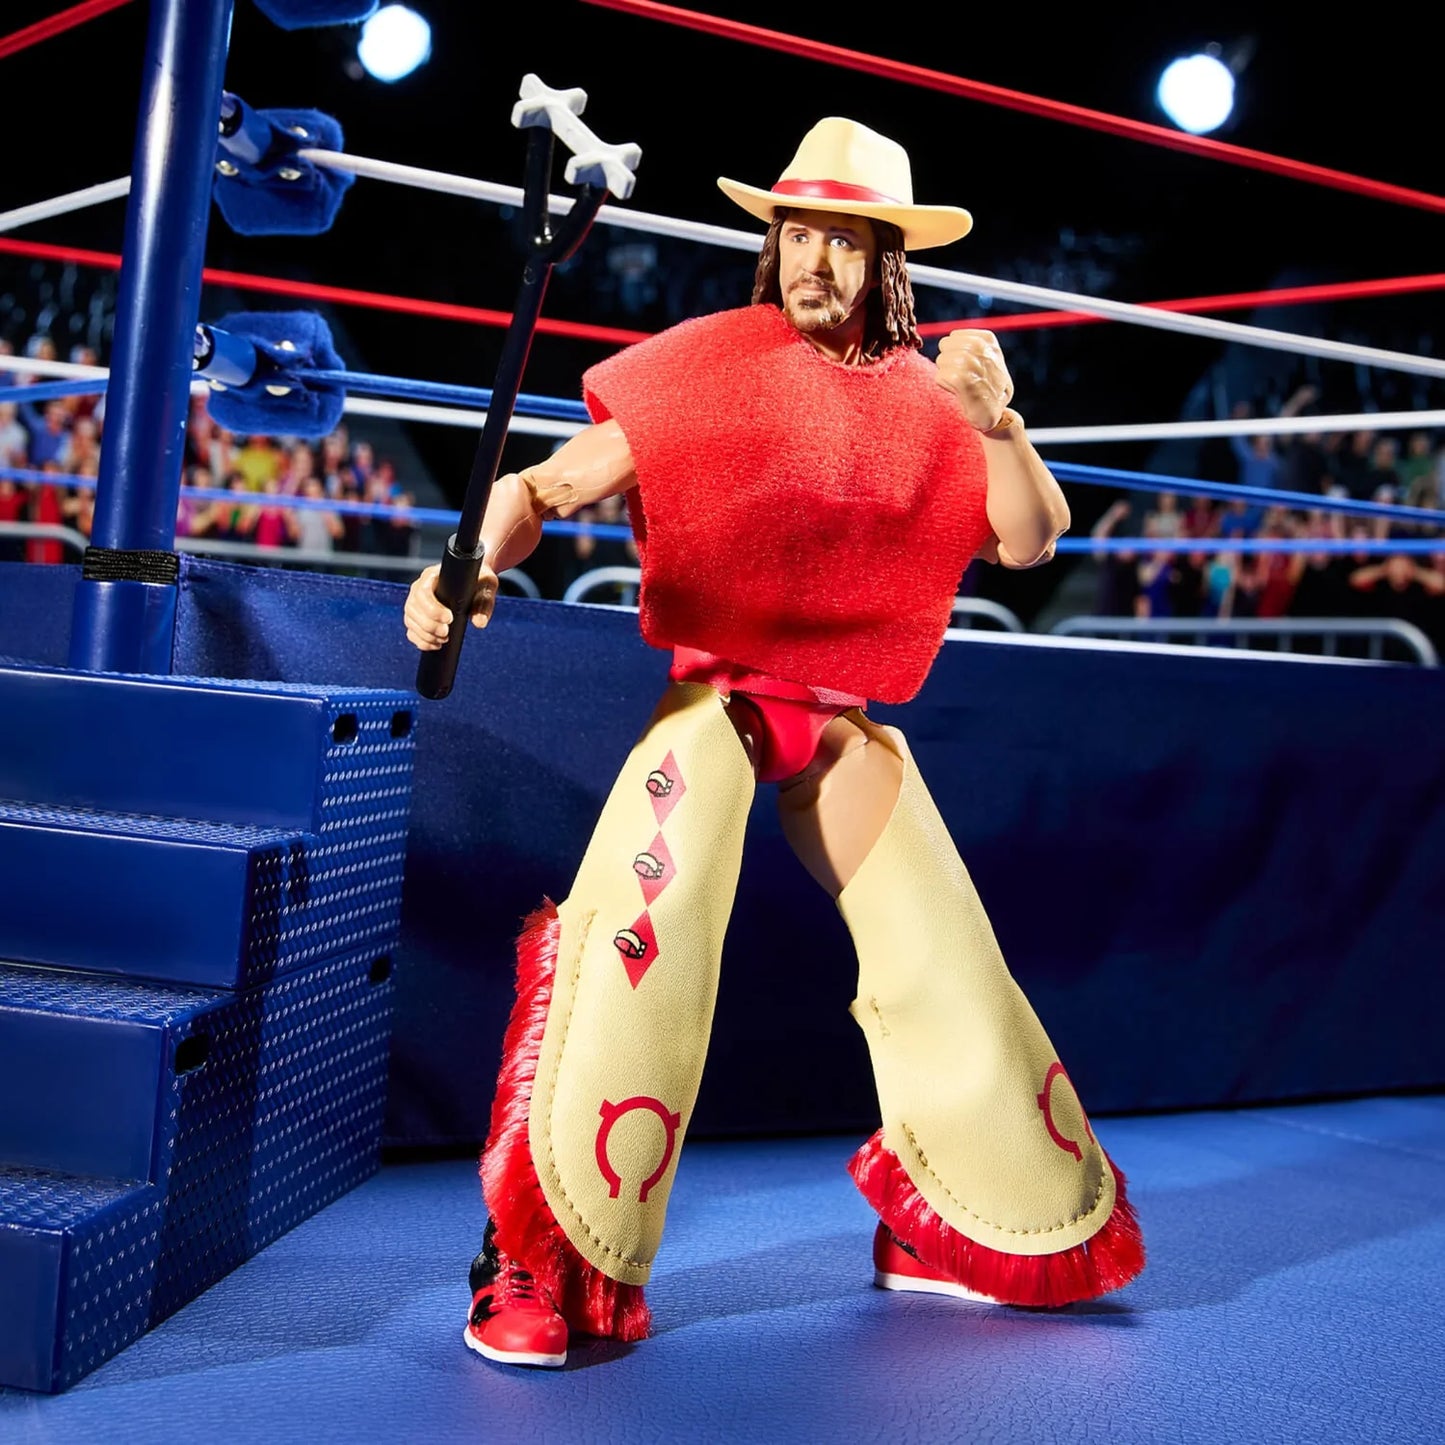 2022 WWE Mattel Ultimate Edition Coliseum Collection Series 1 Terry Funk